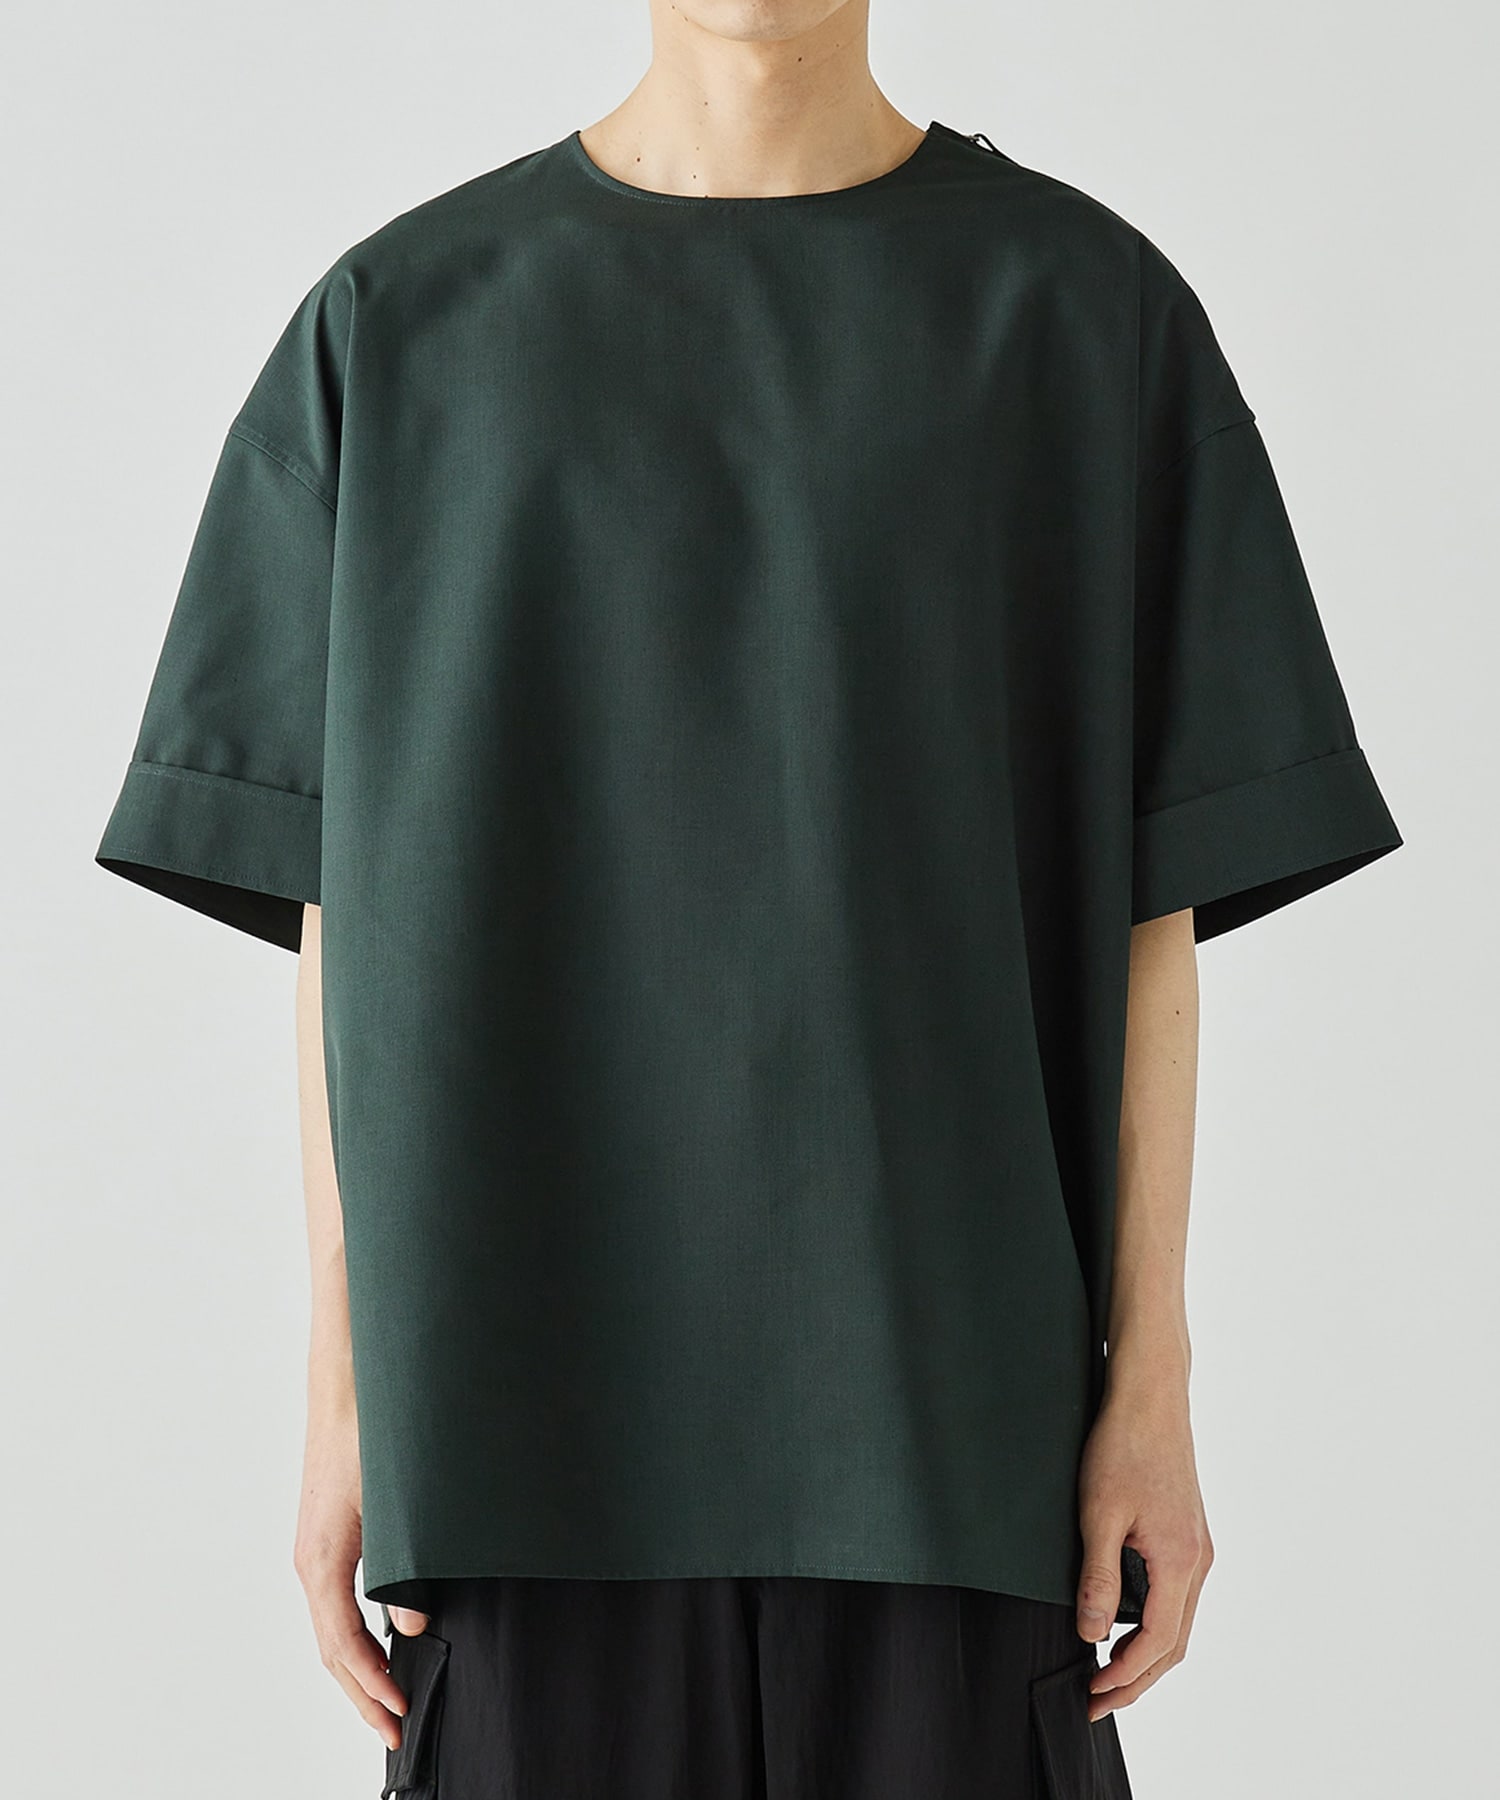 THE SIDE ZIP PULLOVER SHIRT SHORT SLEEVE THE RERACS